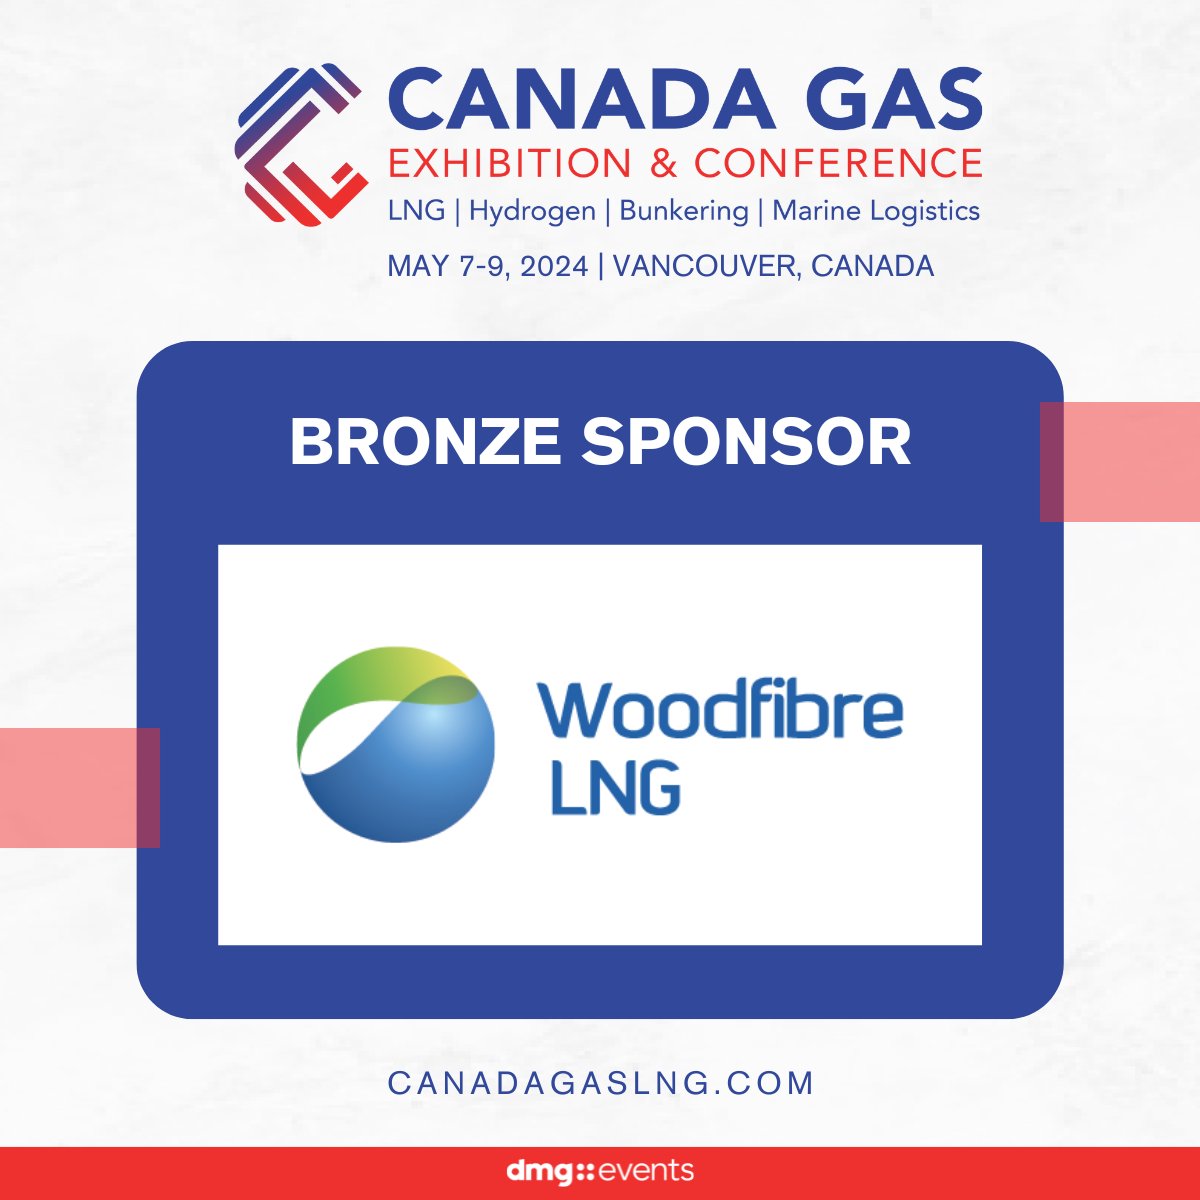 Announcing @WoodfibreLNG as a bronze sponsor! Visit them at booth 211. There's still time to participate in Canada's annual gathering of gas industry. Register today: ow.ly/TCSq50RsSG9

#CG2024 #canadagas #gasindustry #lng